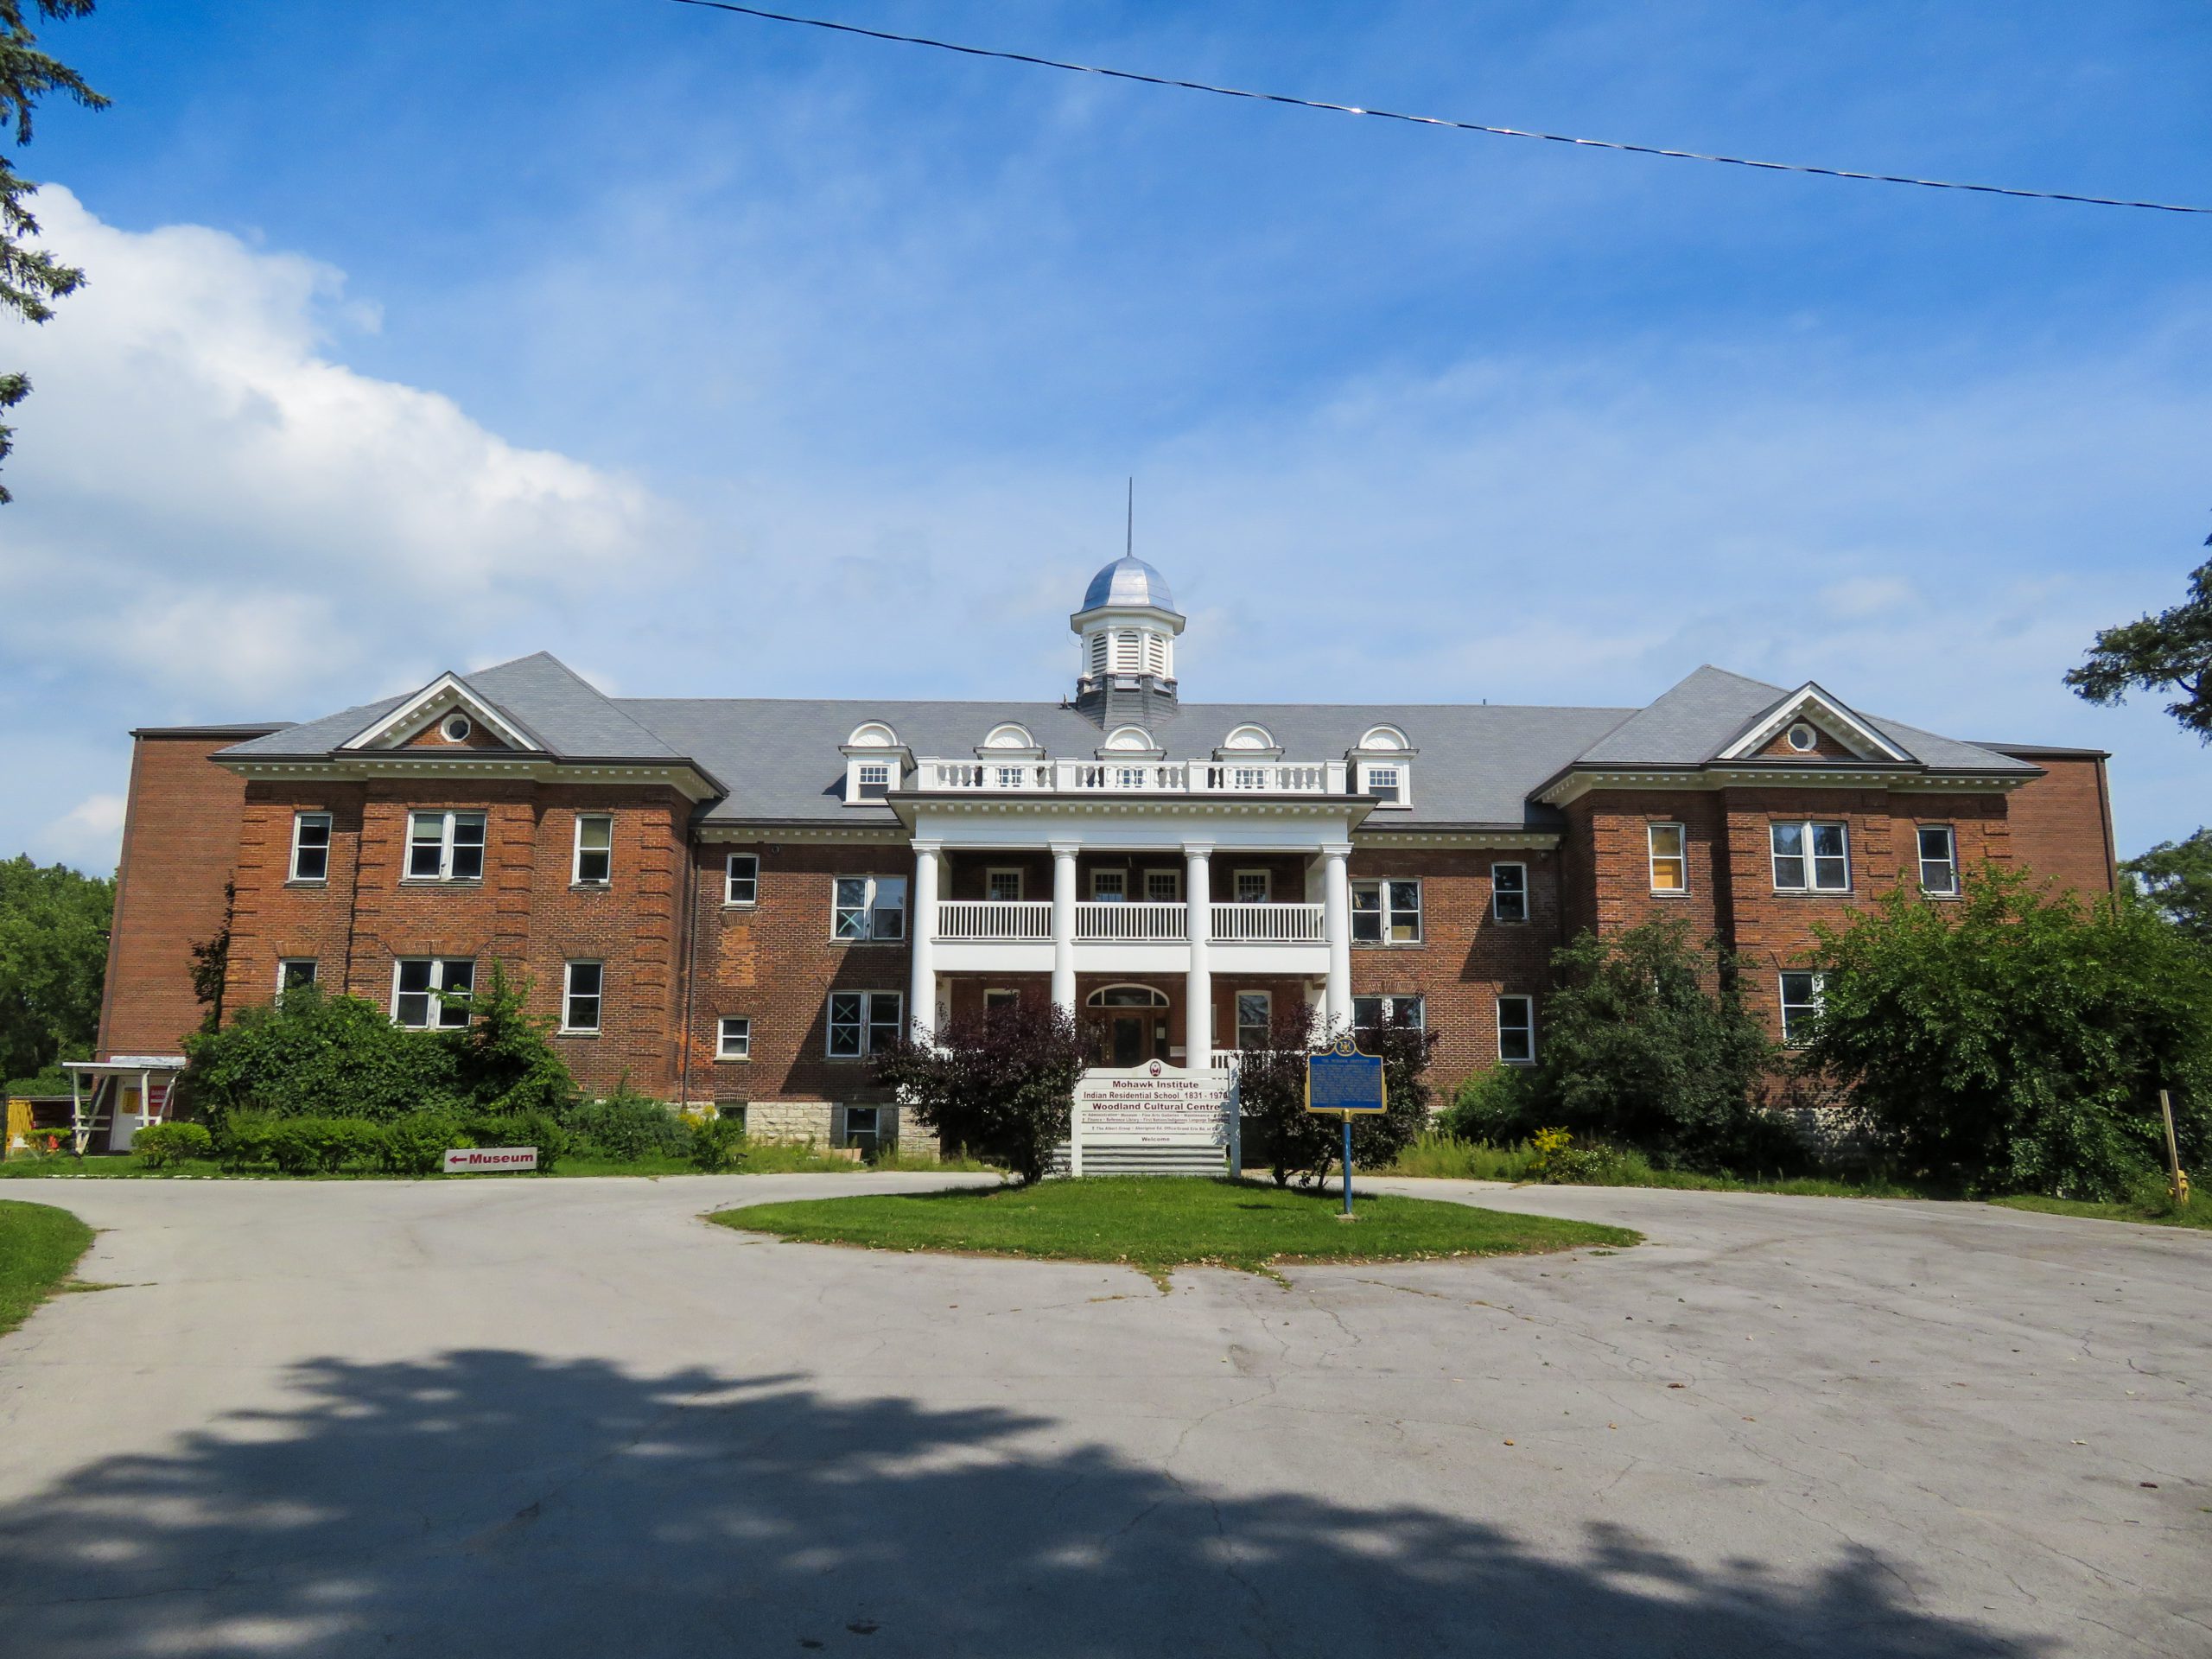 Residential School Survivors of Akwesasne: No apology without justice